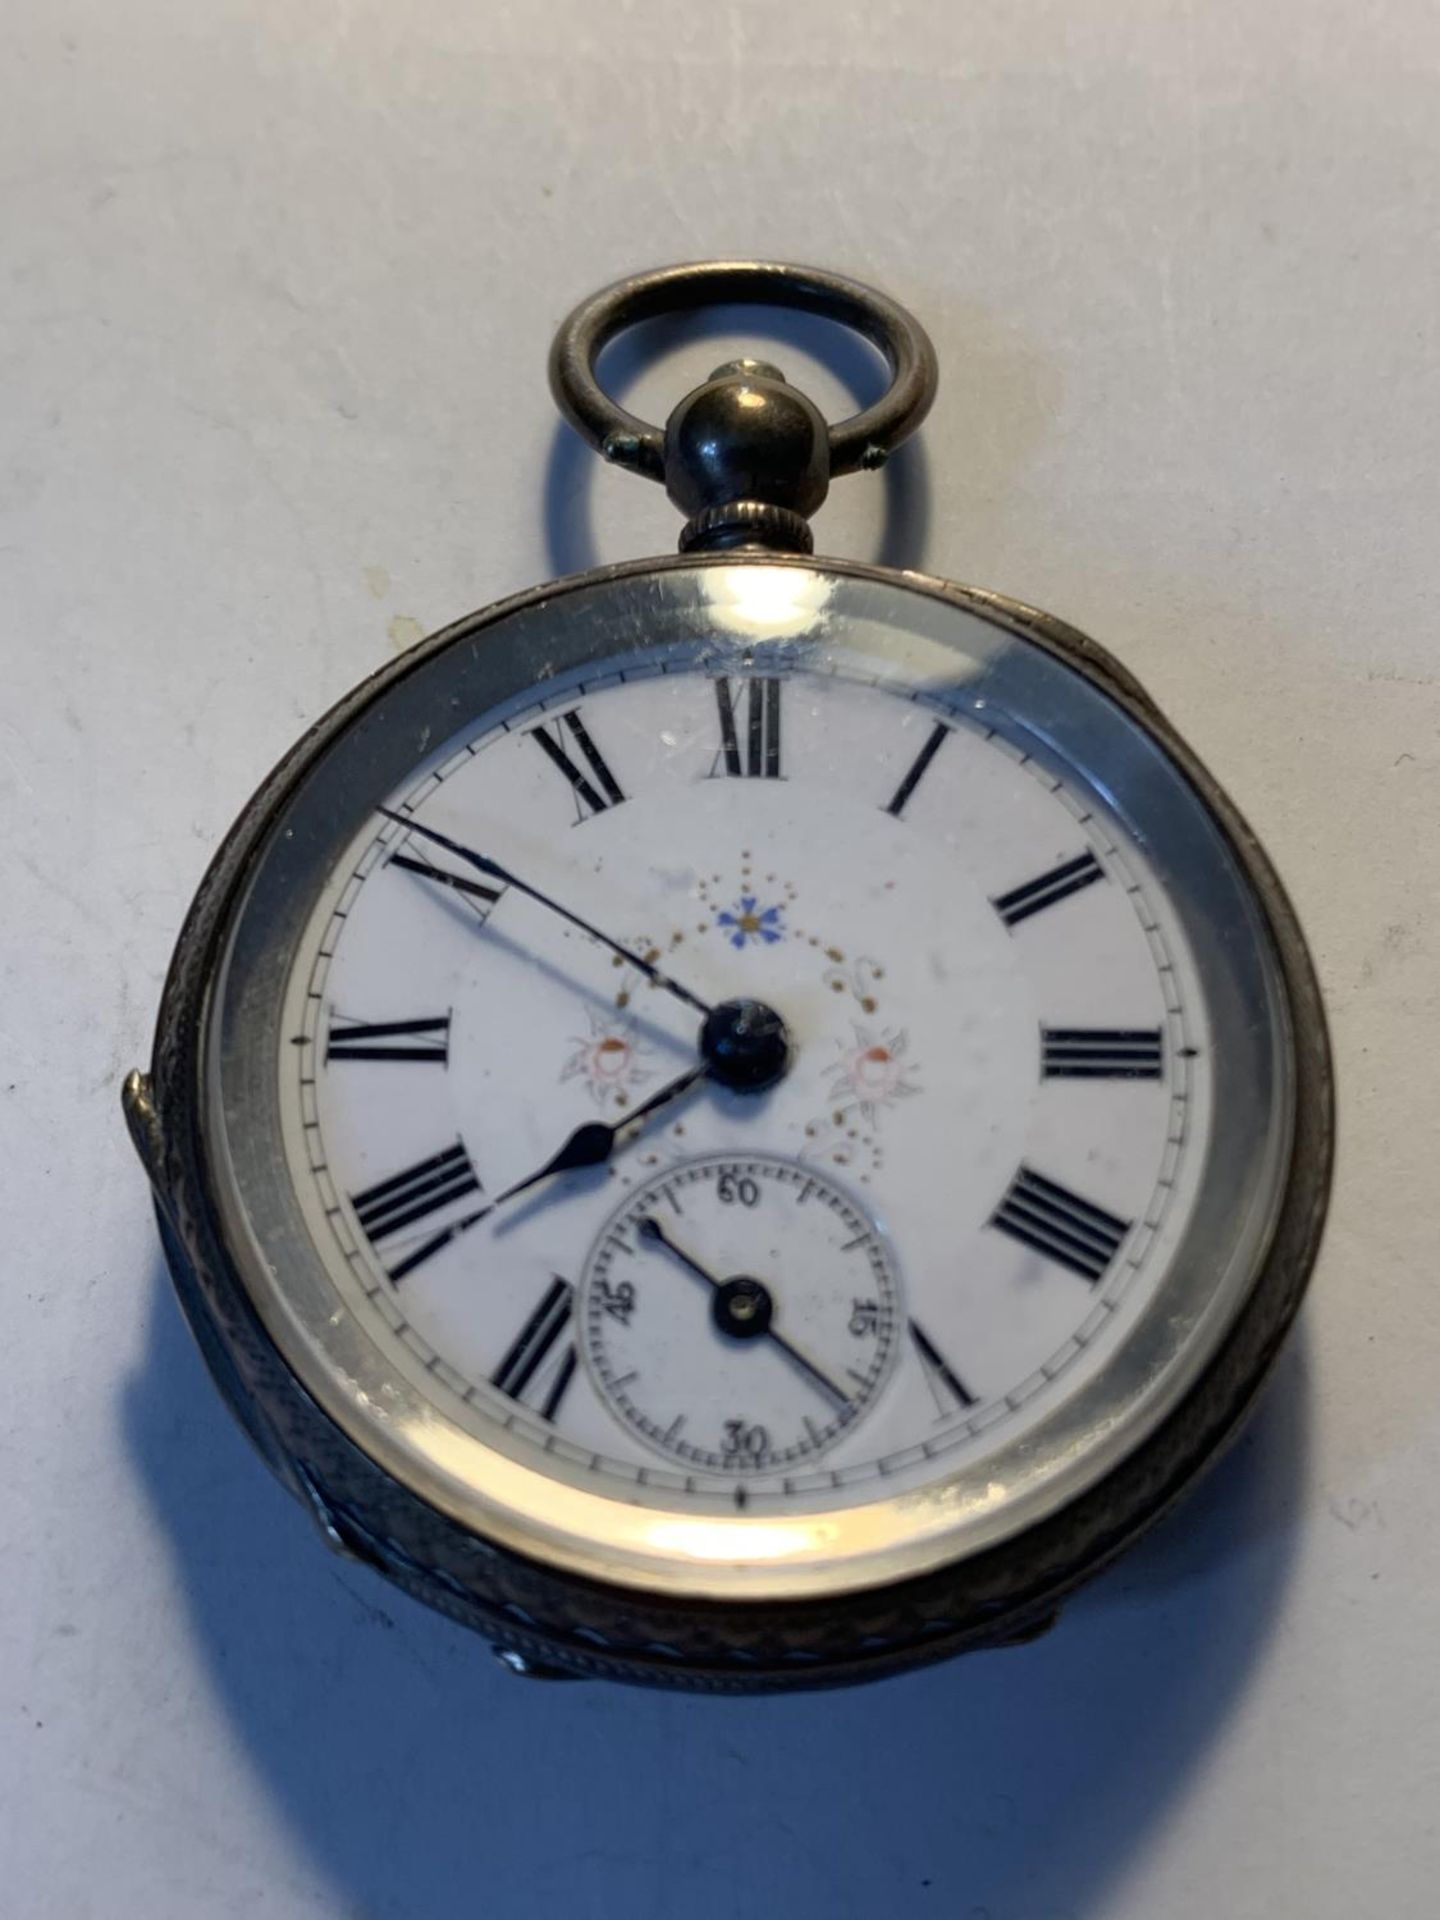 AN 800 SILVER POCKET WATCH WITH SUB DIAL, DECORATIVE WHITE ENAMEL FACE, ROMAN NUMERALS AND A KEY - Image 2 of 4